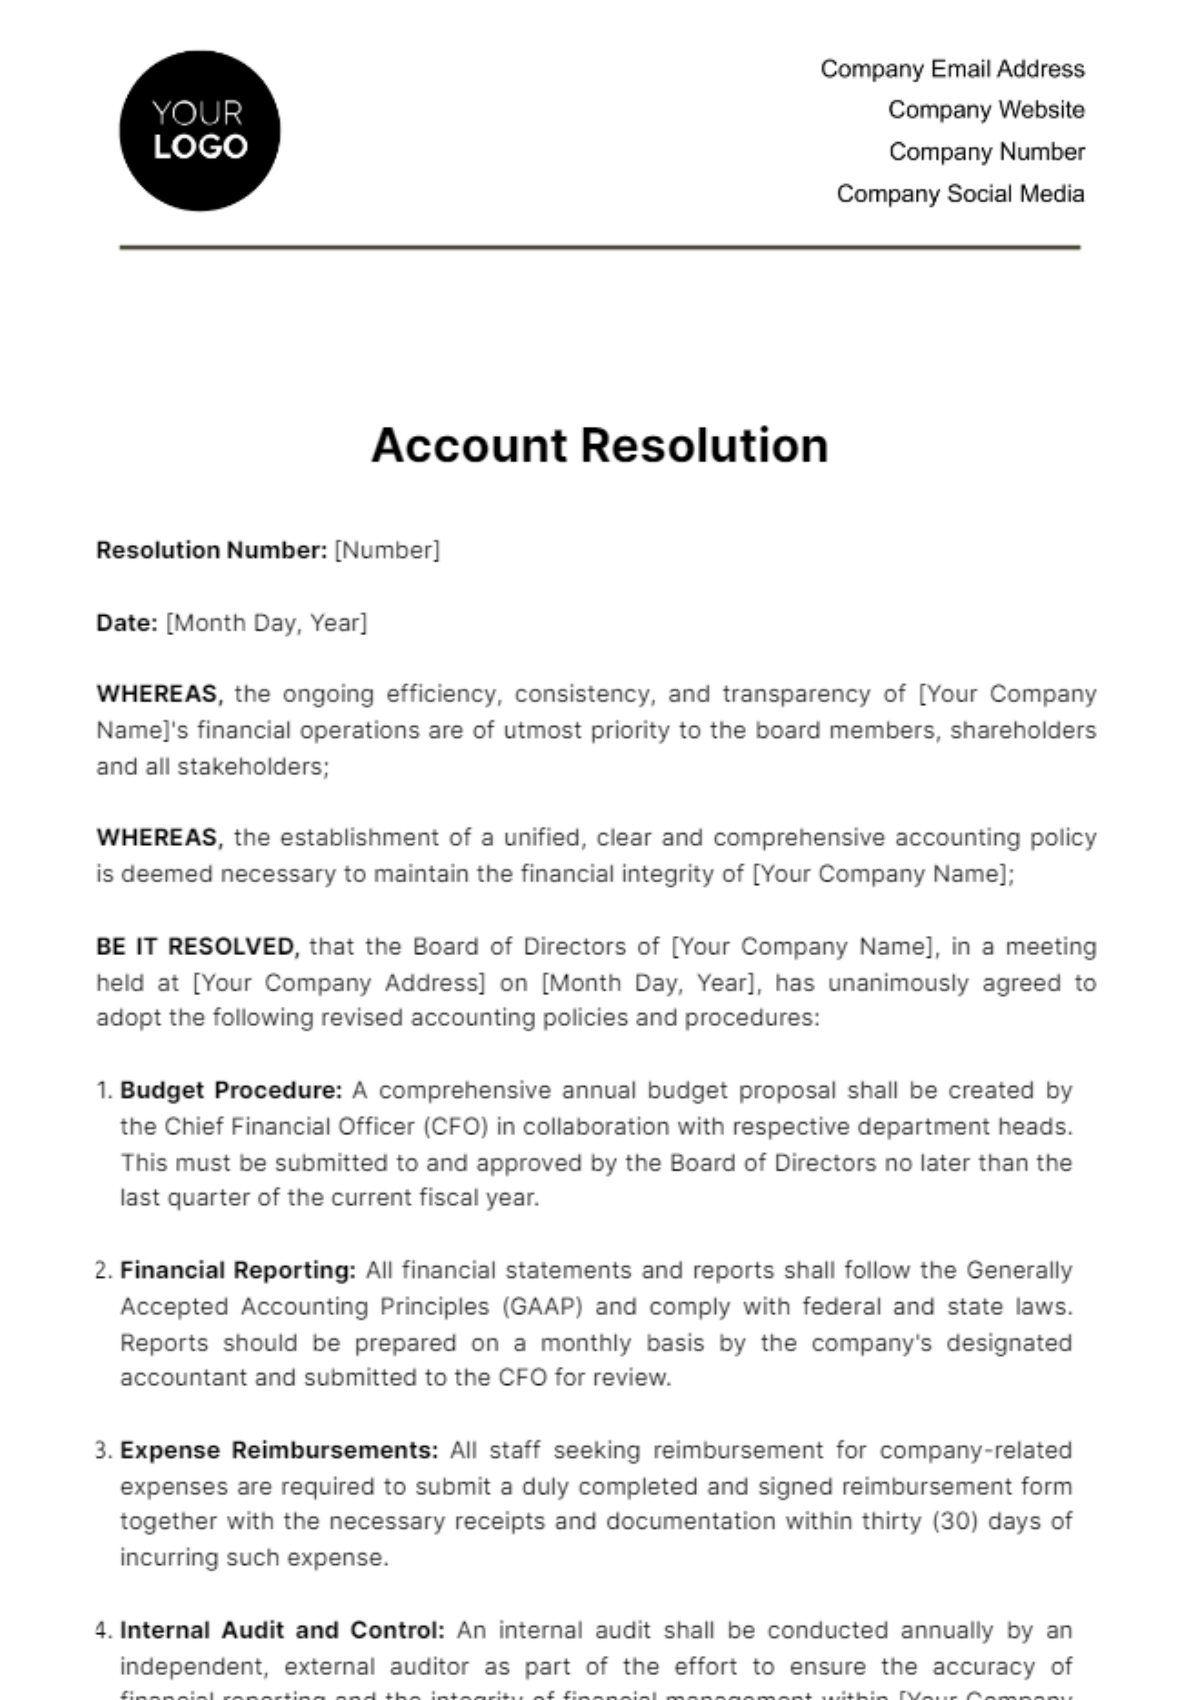 Account Resolution Template